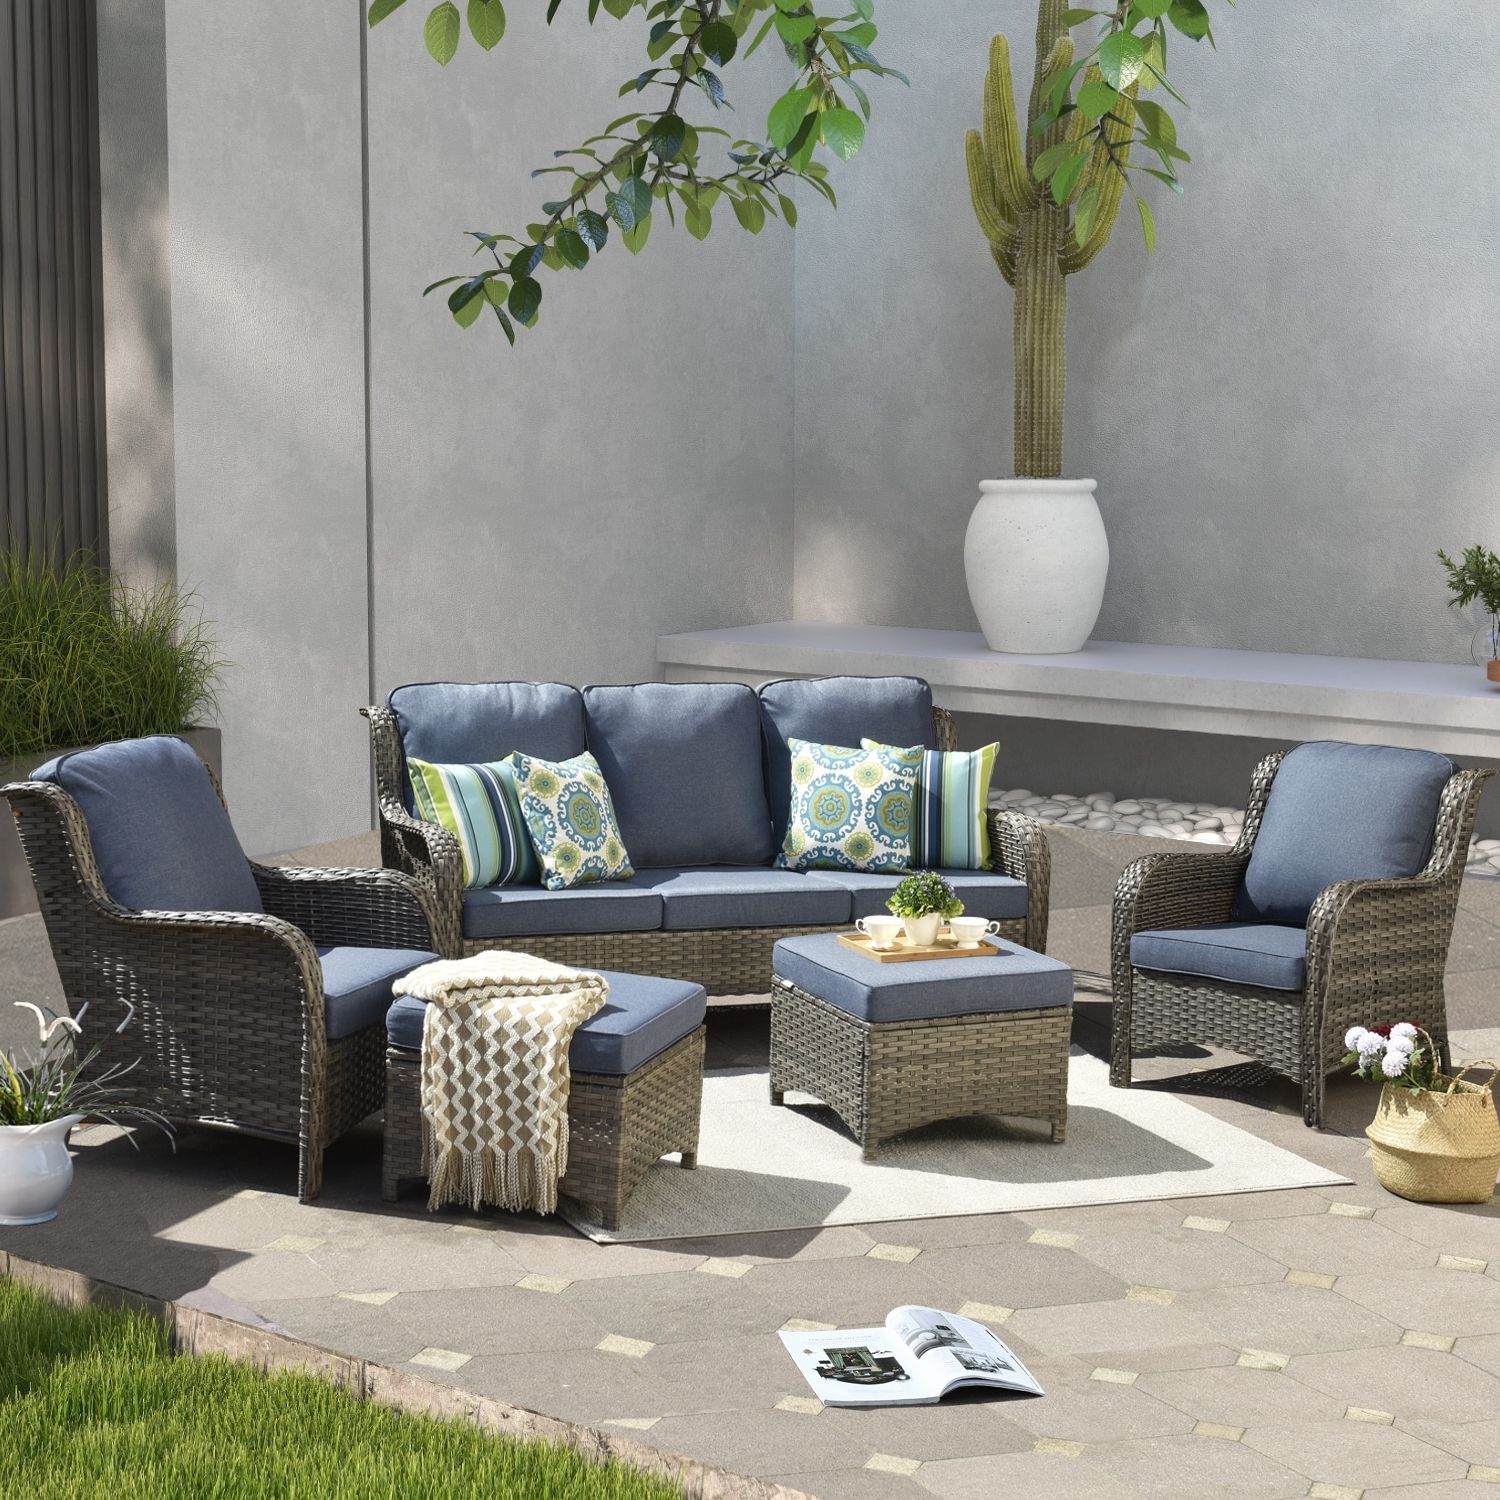 Well Known 5 Piece Patio Conversation Set Throughout Ovios 5 Piece Patio Conversation Wicker Furniture Set – On Sale – –  (View 14 of 16)